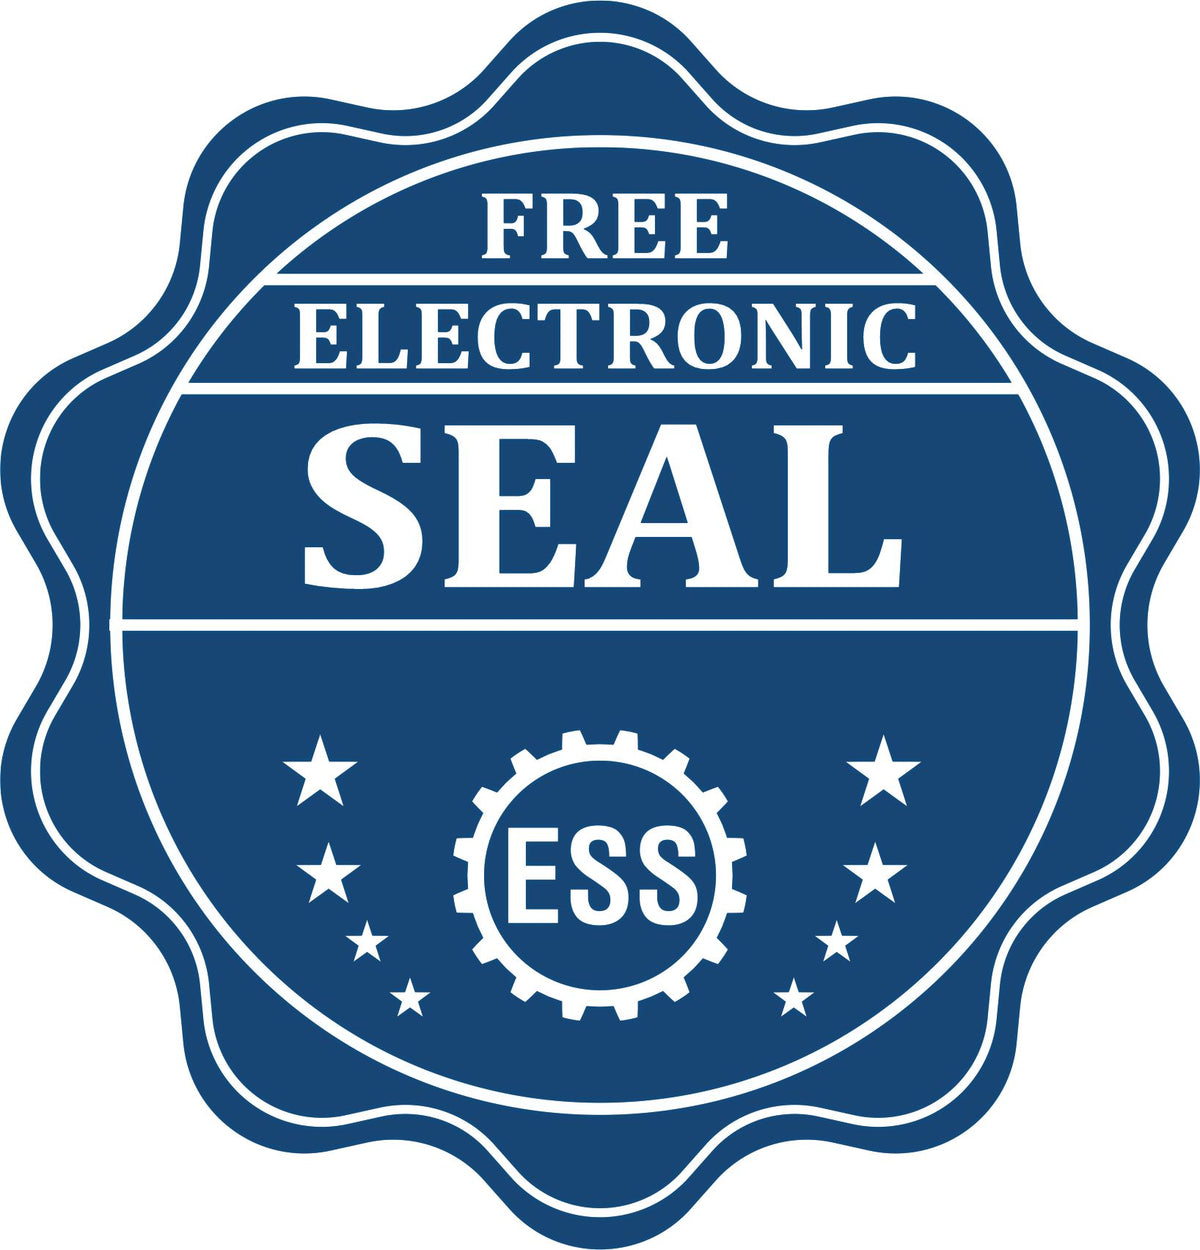 A badge showing a free electronic seal for the Hybrid Indiana Engineer Seal with stars and the ESS gear on the emblem.